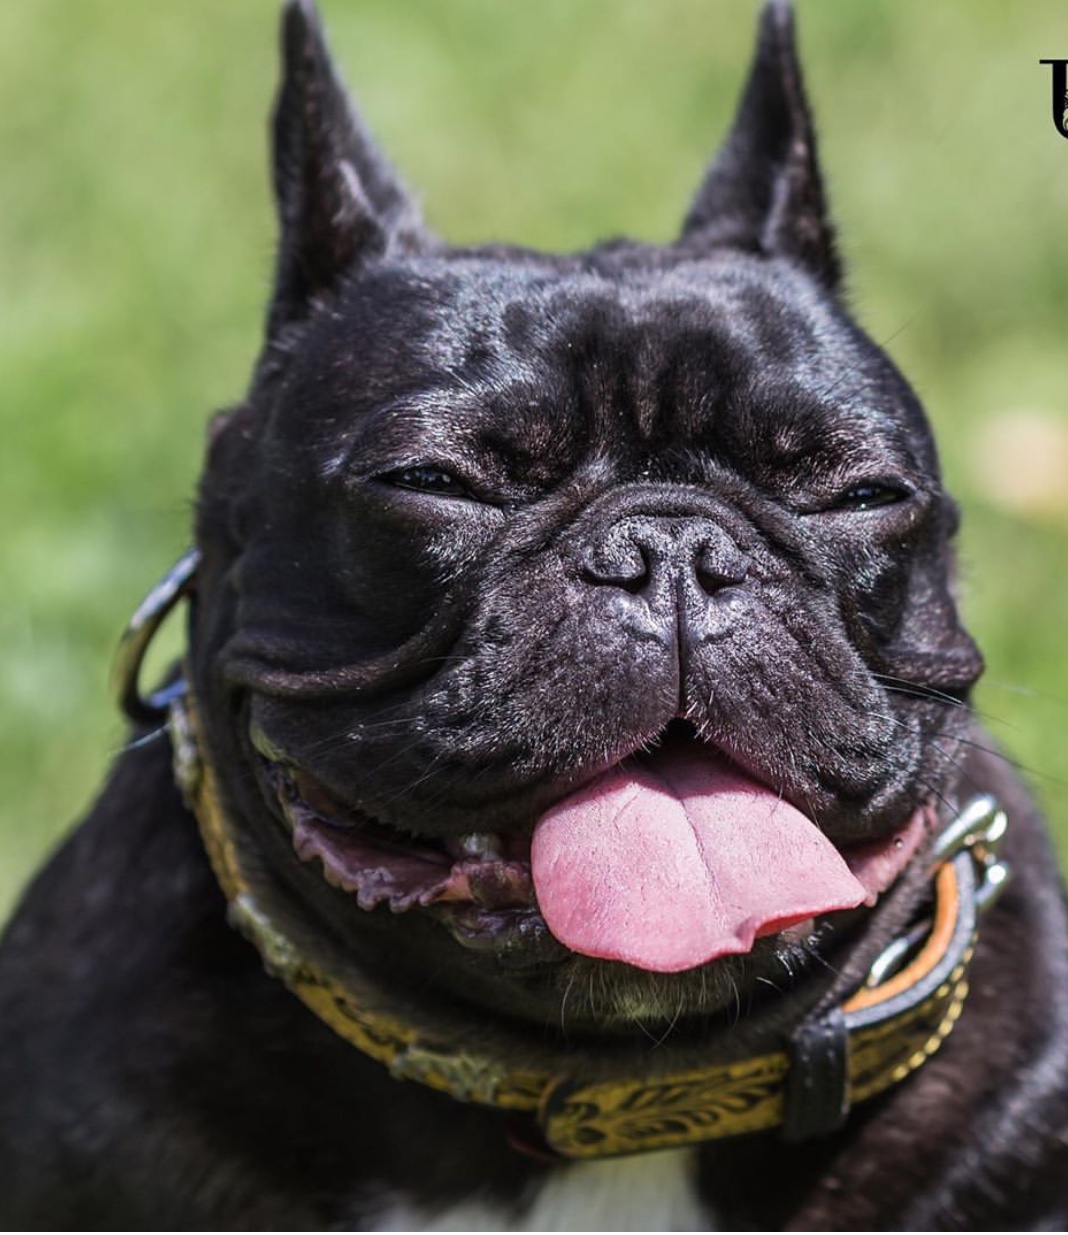 A French Bulldog sitting on the grass with its tongue out and under the sun